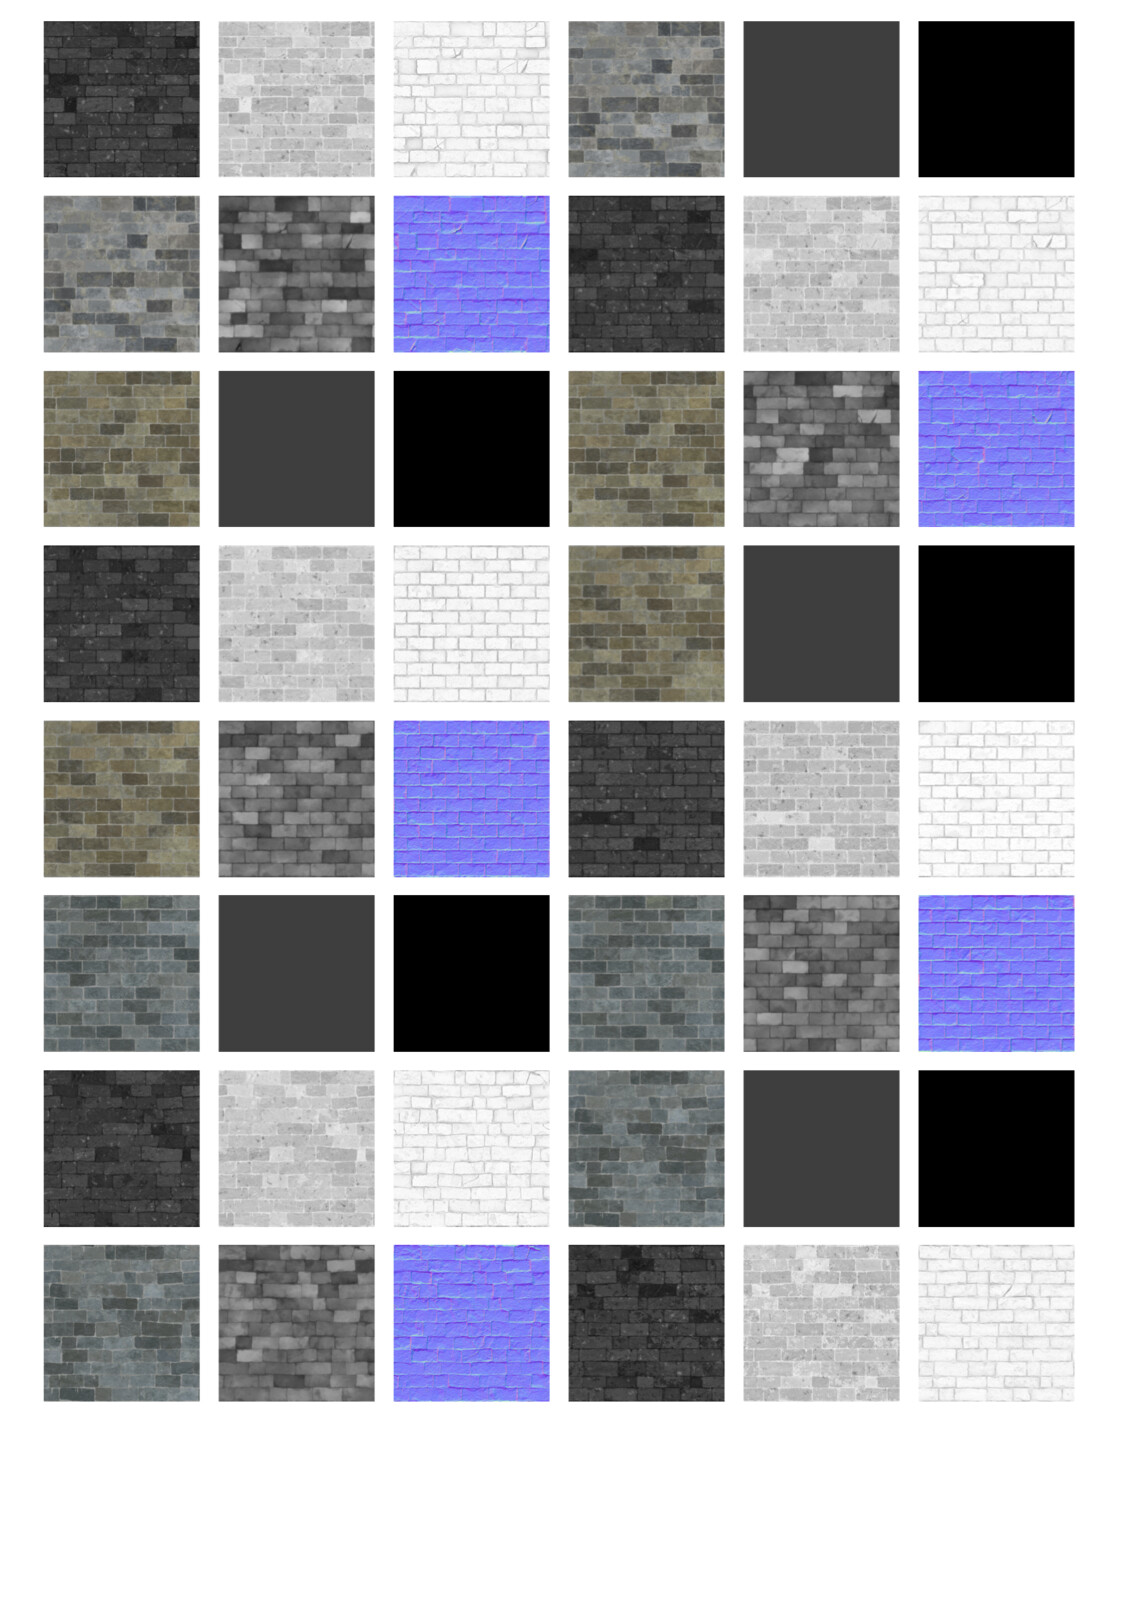 Here is one of two of an overview of many of the bespoke materials individual texture maps I created for JGA - this doesn't show the in-ArchiCAD only vector artwork I created and associated with these materials